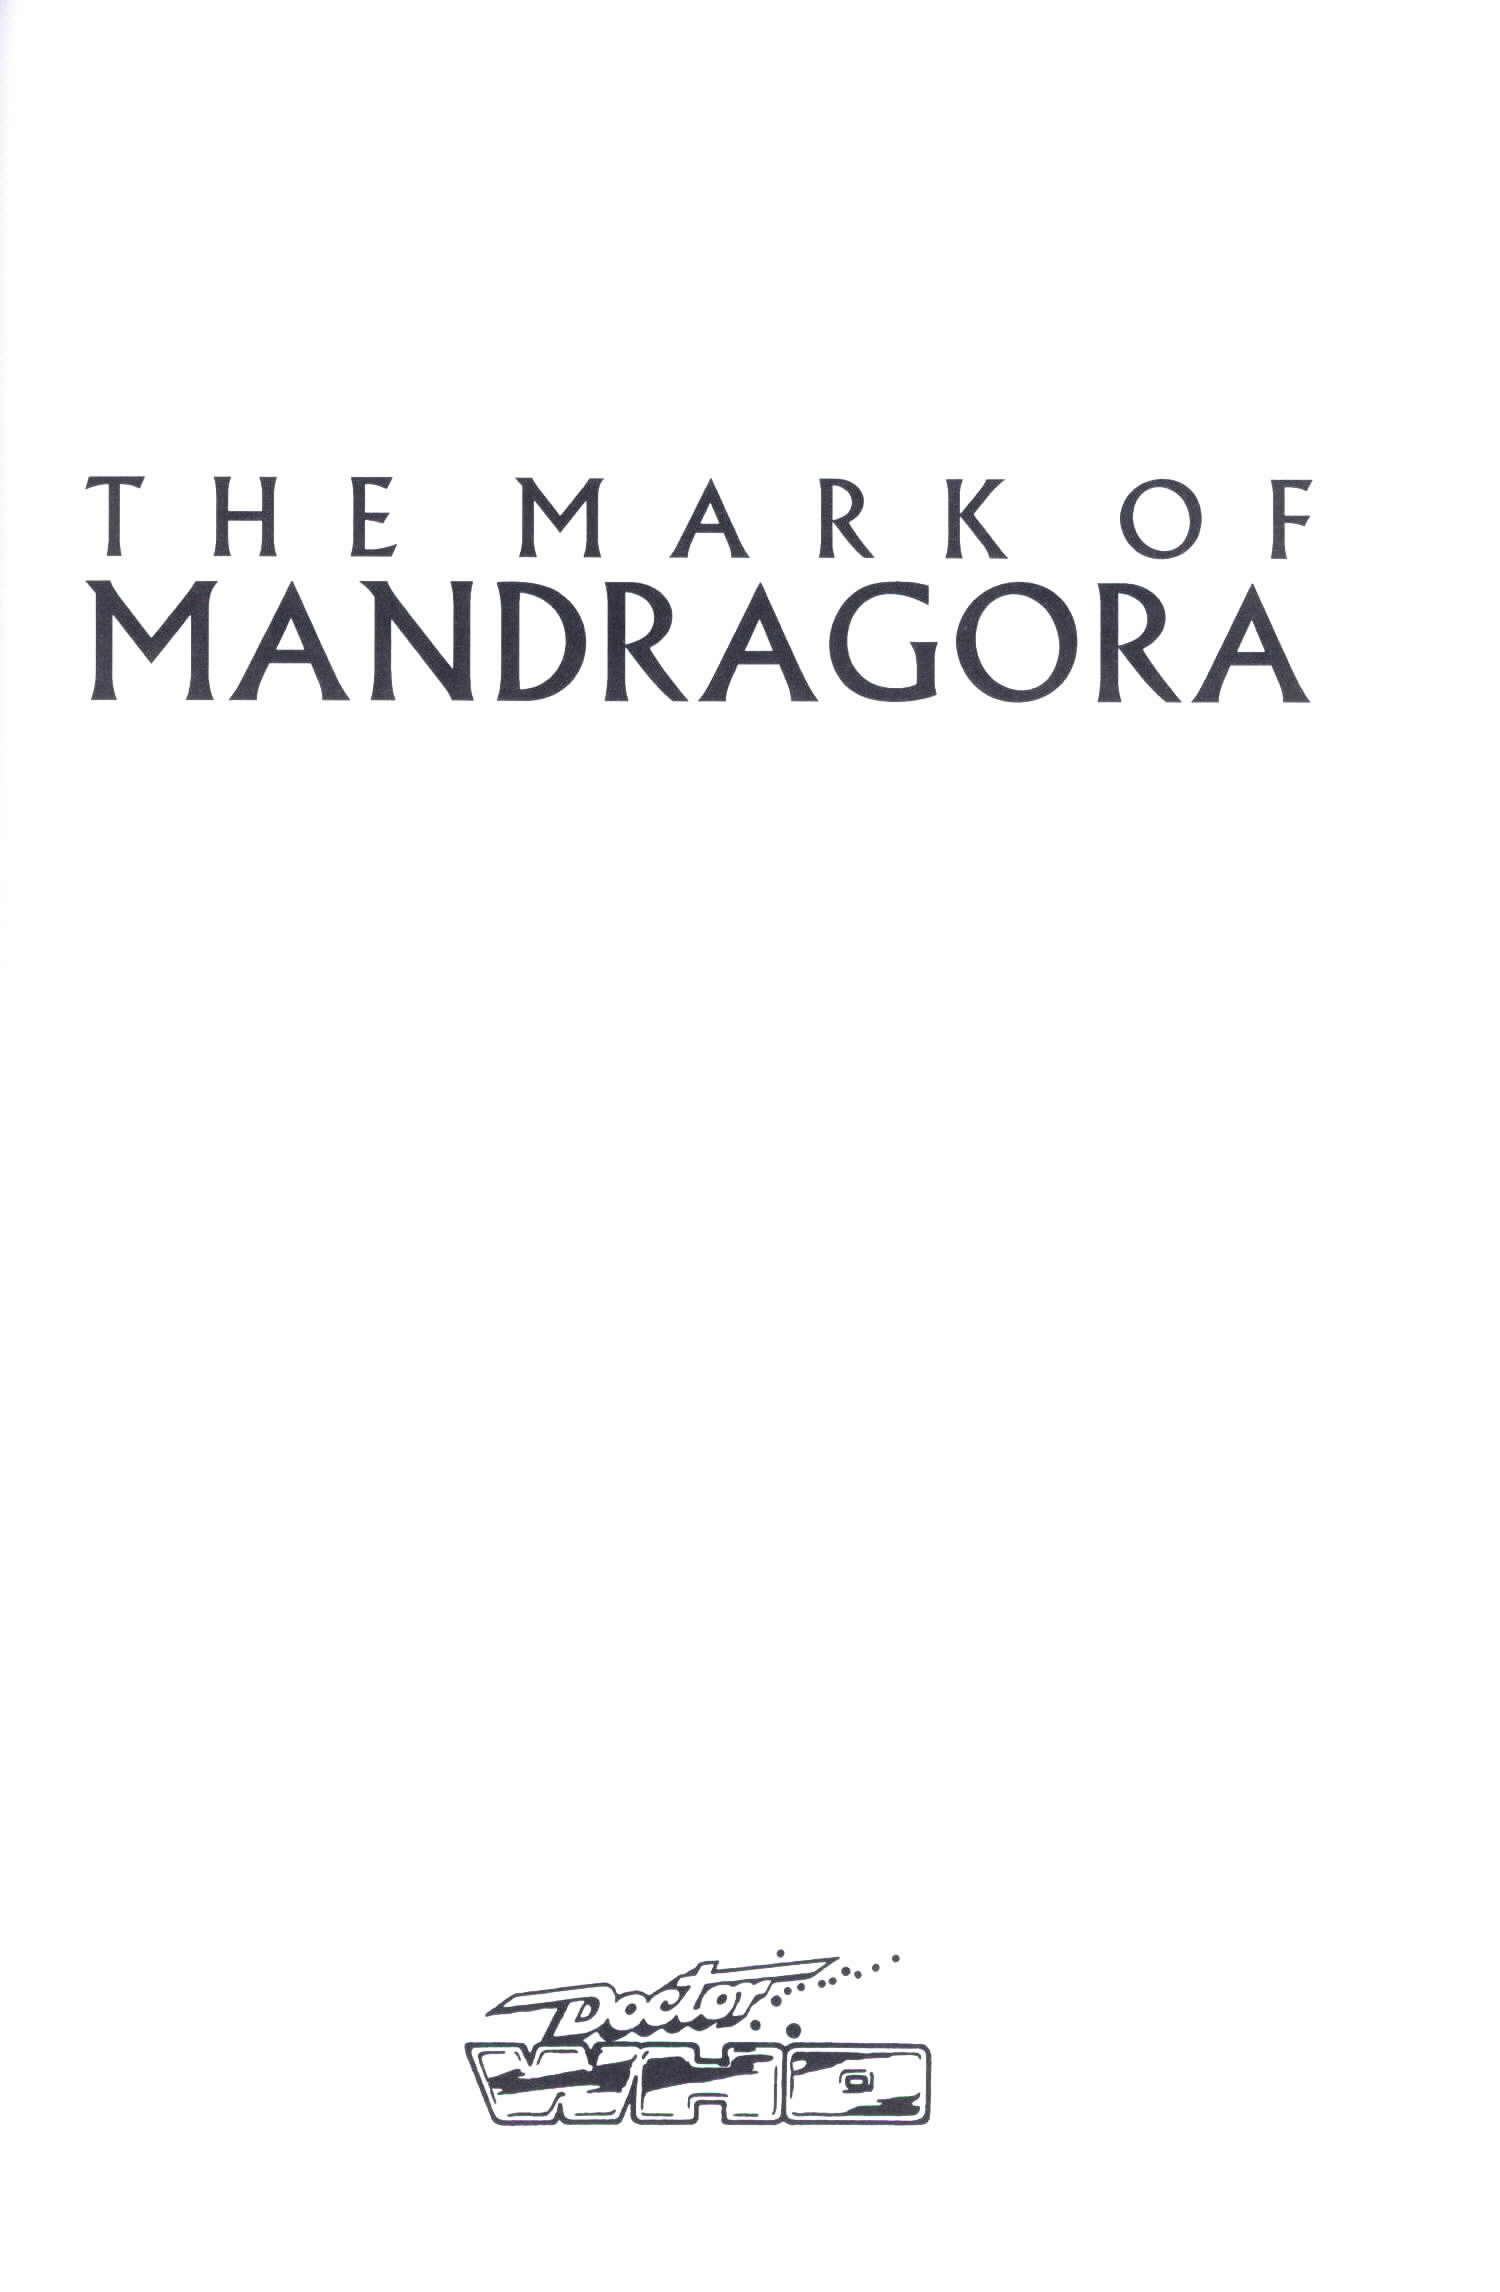 Read online The Mark of Mandragora comic -  Issue # TPB - 3